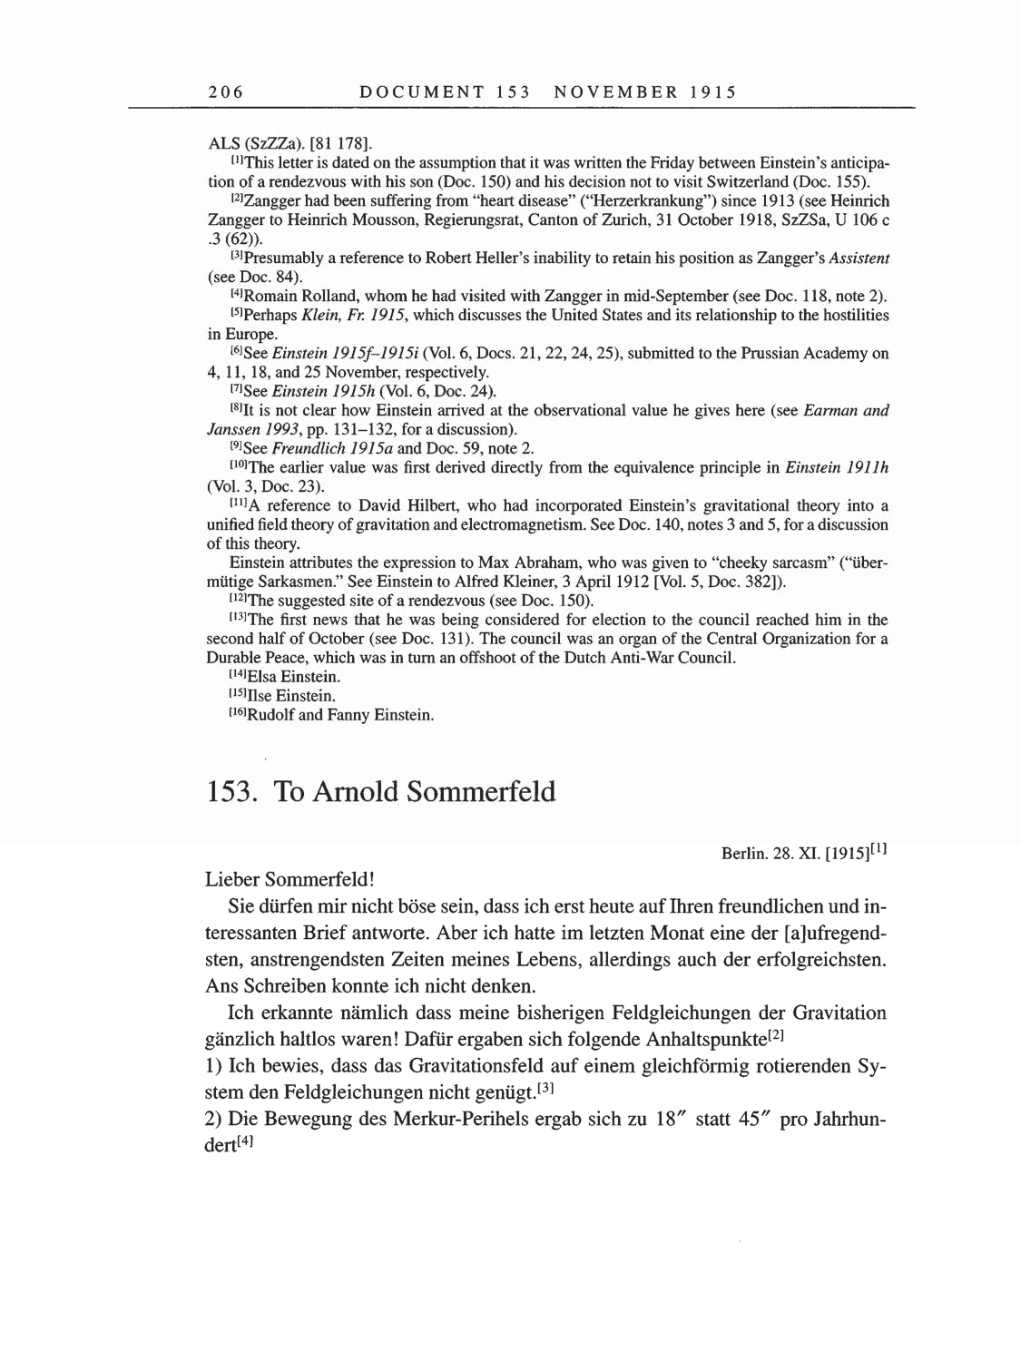 Volume 8, Part A: The Berlin Years: Correspondence 1914-1917 page 206